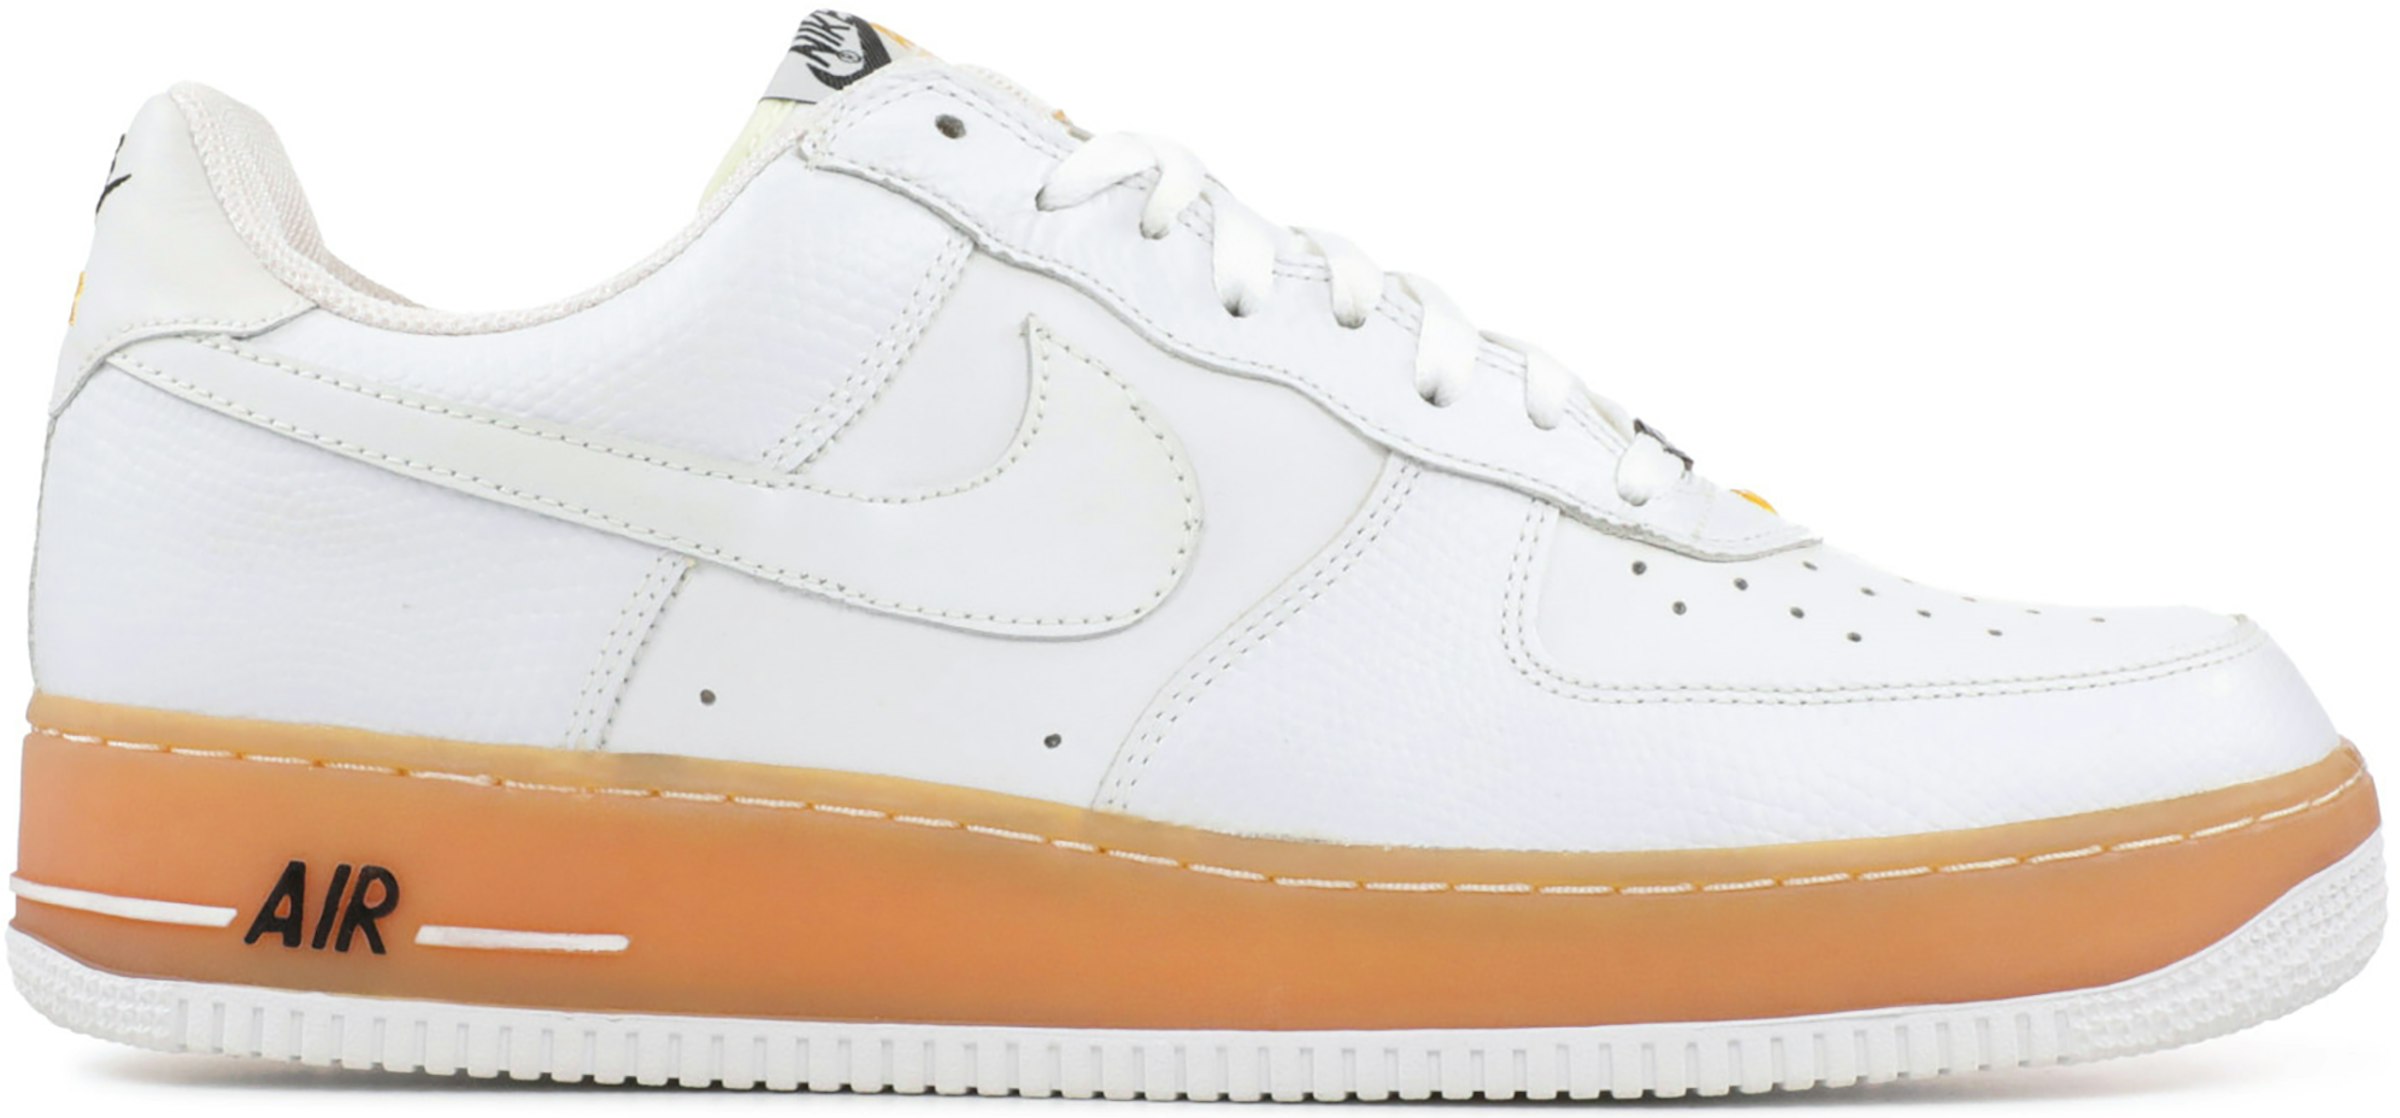 Nike Air Force 1 Low JD Sports White Gum - 306353-902